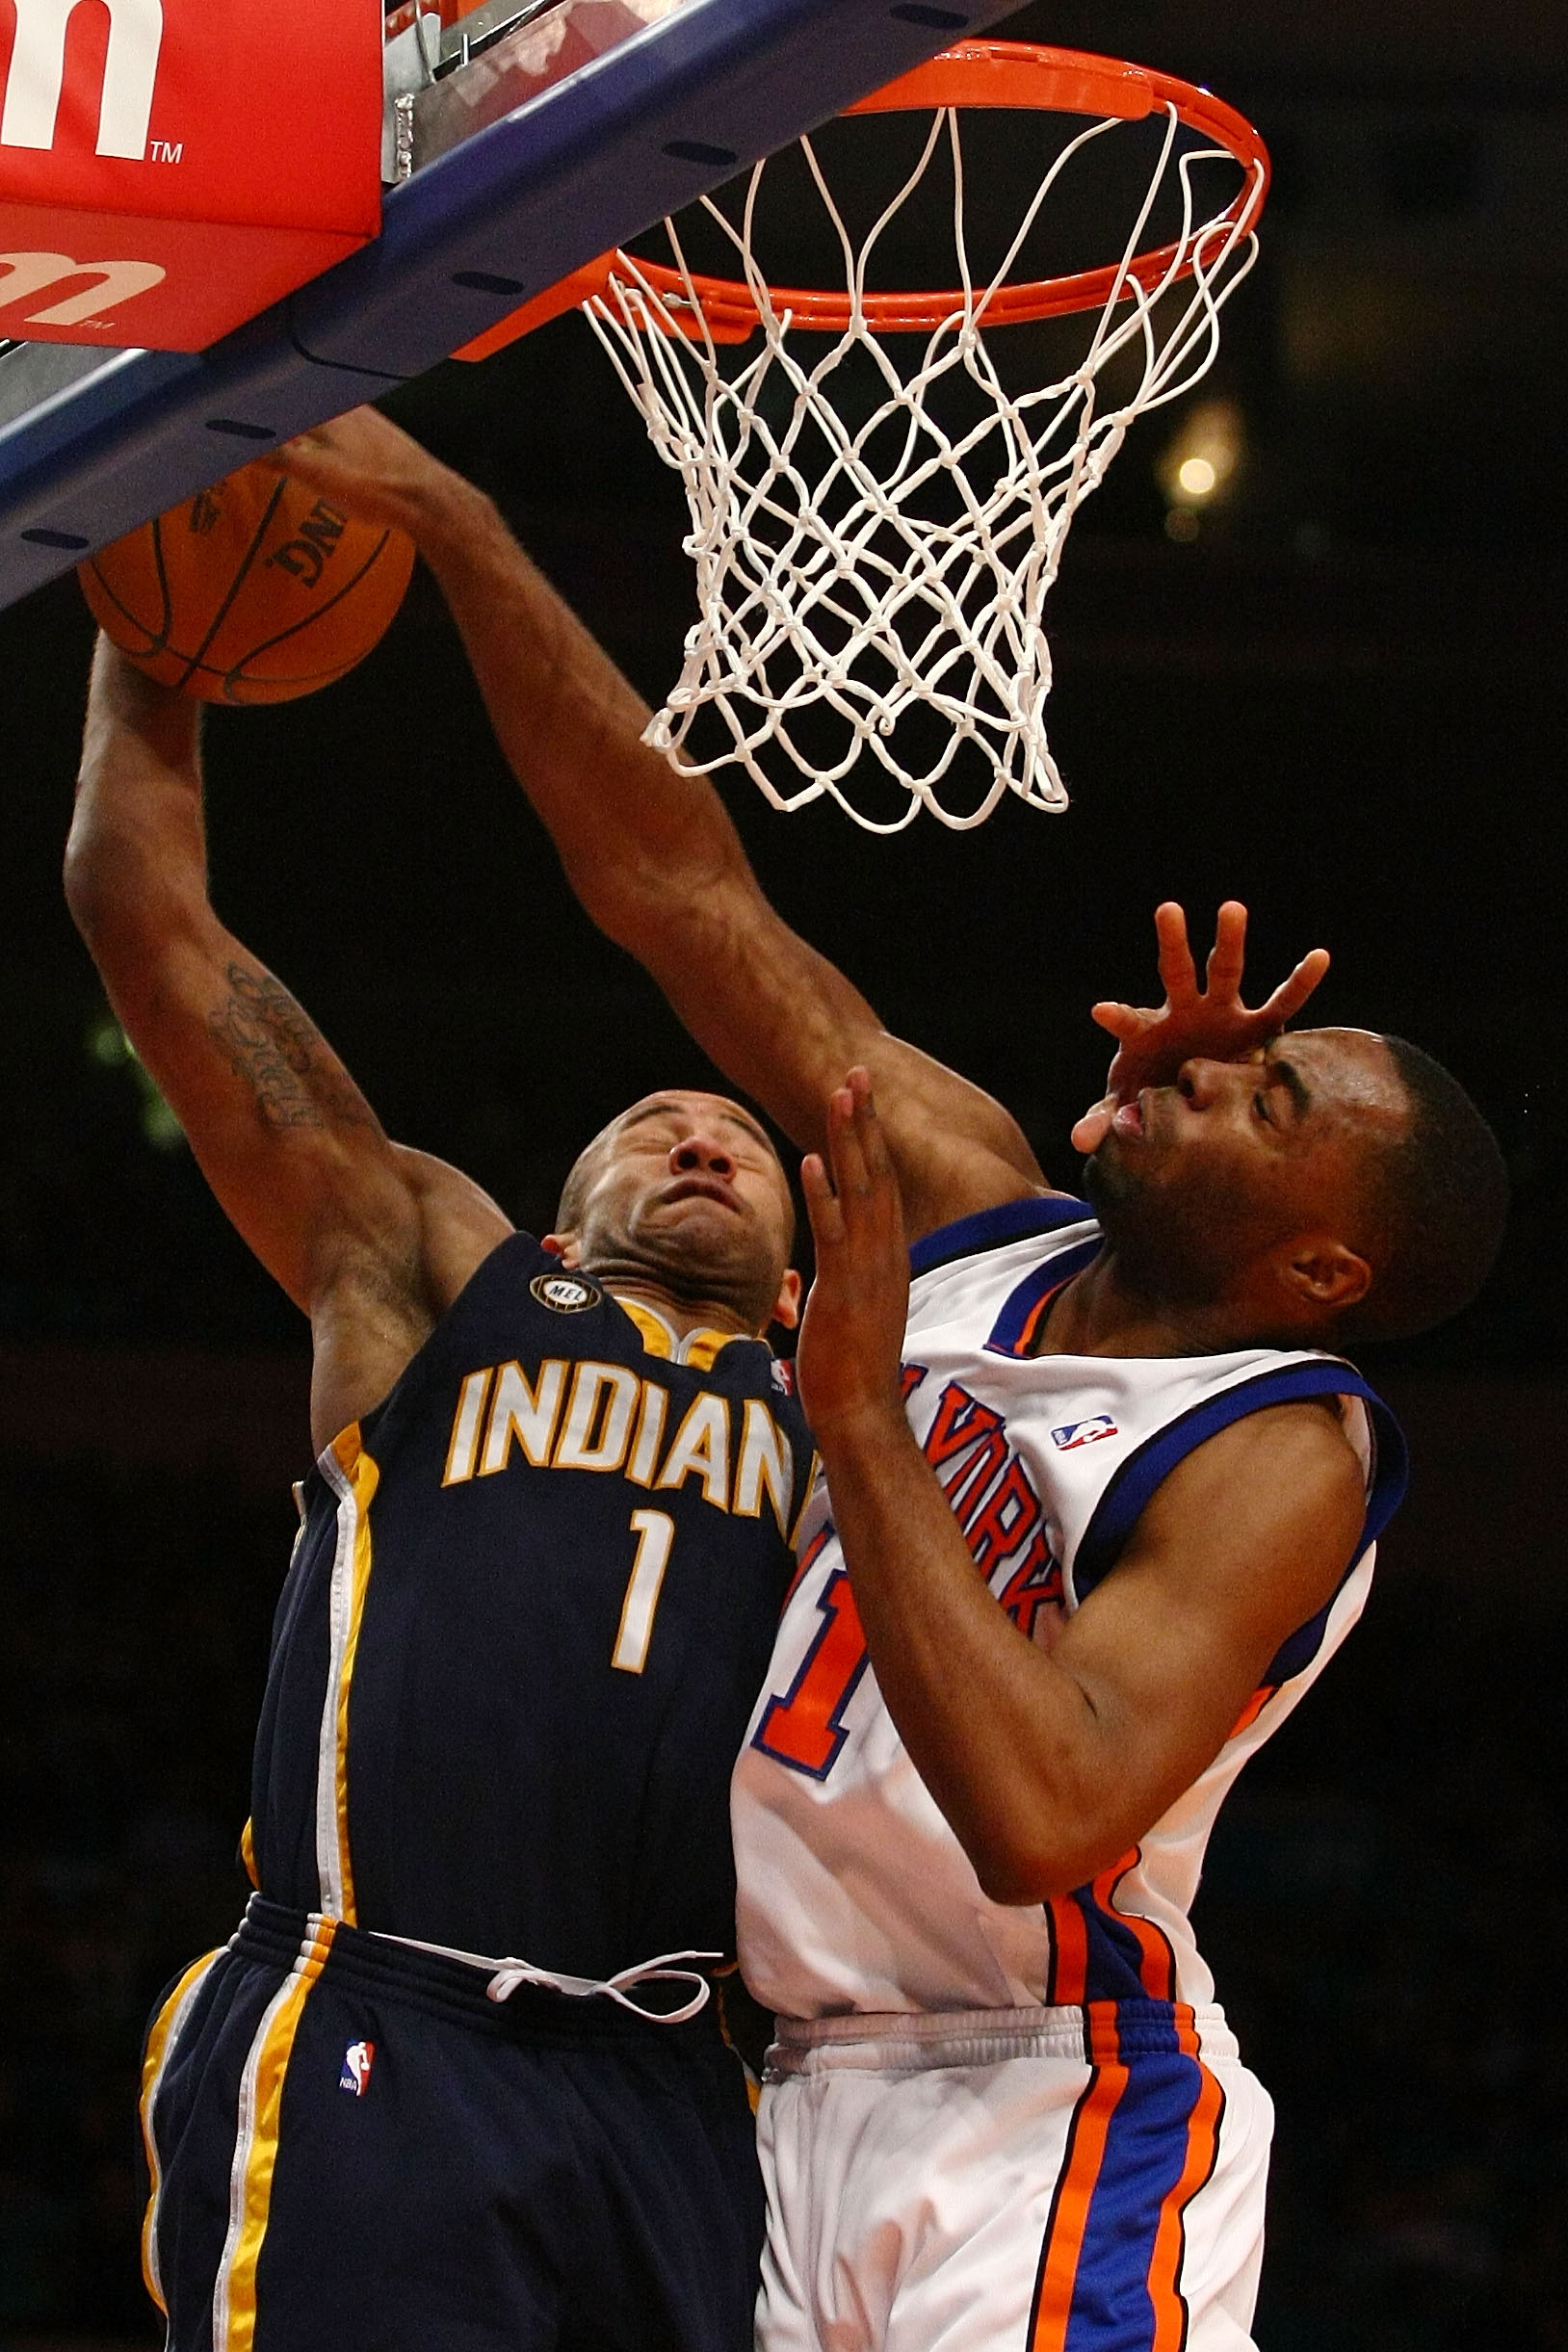 NEW YORK - JANUARY 03: Dahntay Jones #1 of the Indiana Pacers has his shot rejected by Marcus Landry #11 of the New York Knicks at Madison Square Garden January 3, 2010 in New York City. NOTE TO USER: User expressly acknowledges and agrees that, by downlo